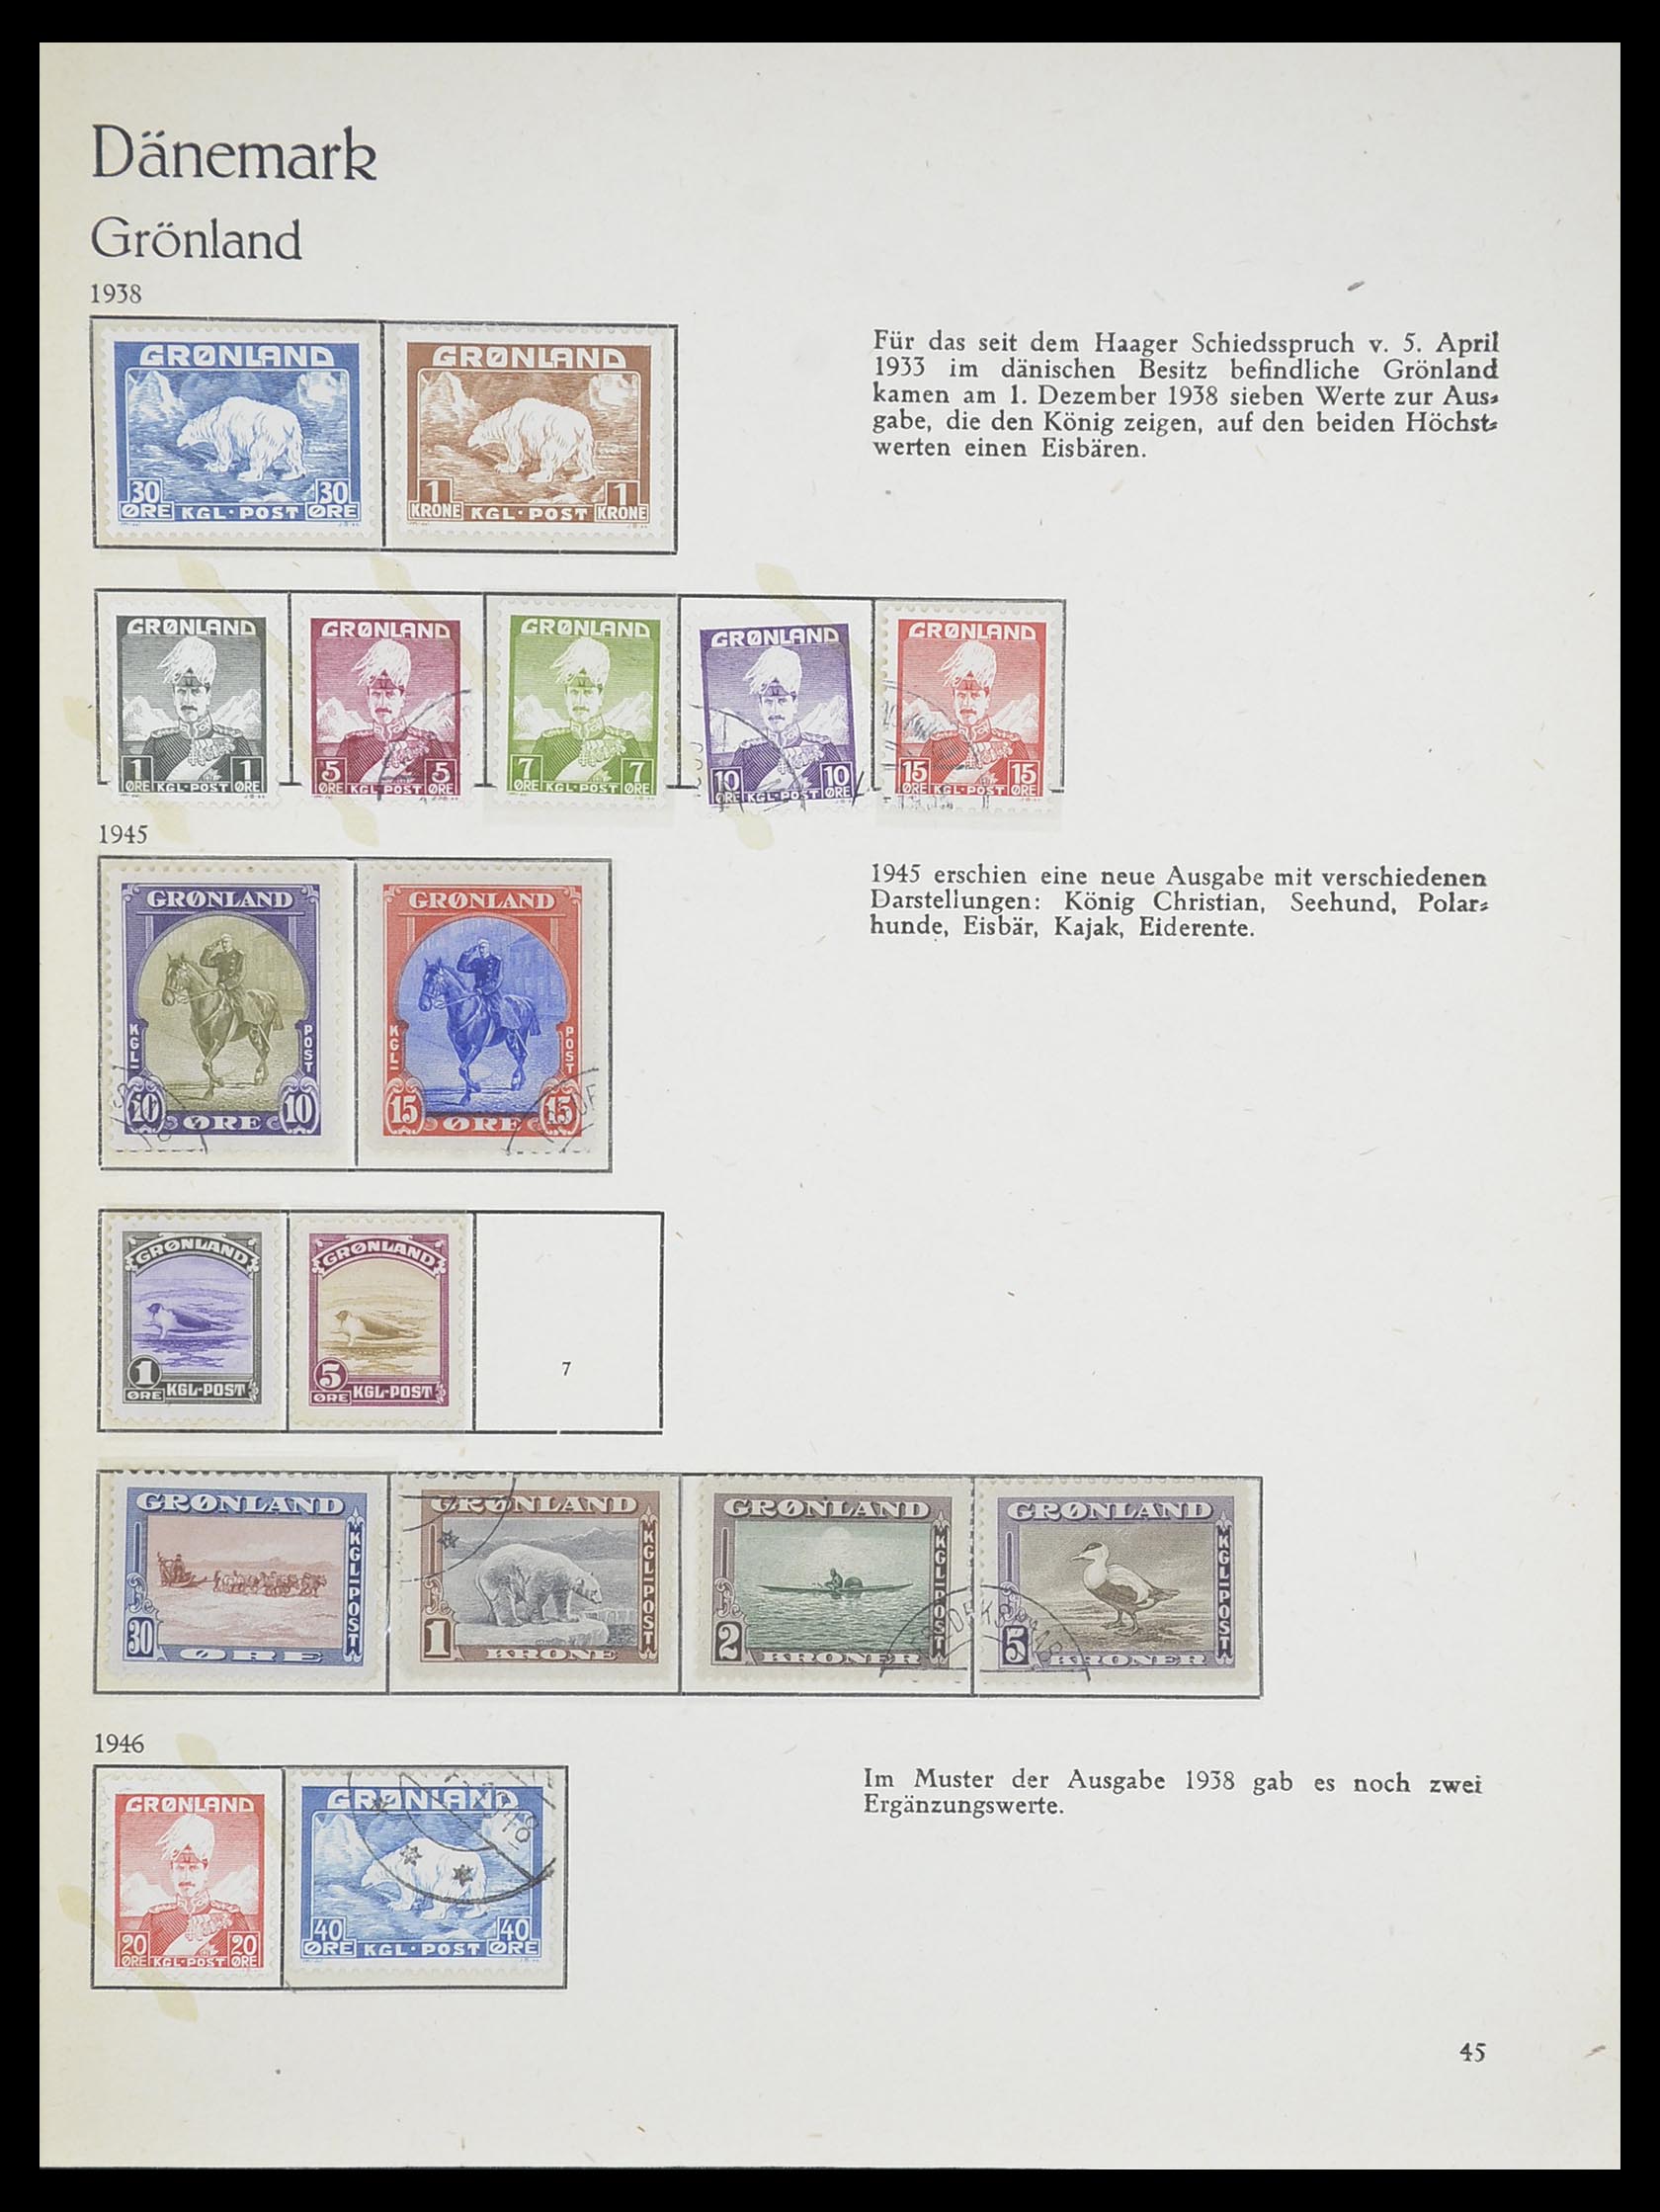 33708 022 - Stamp collection 33708 Denmark 1851-1970.